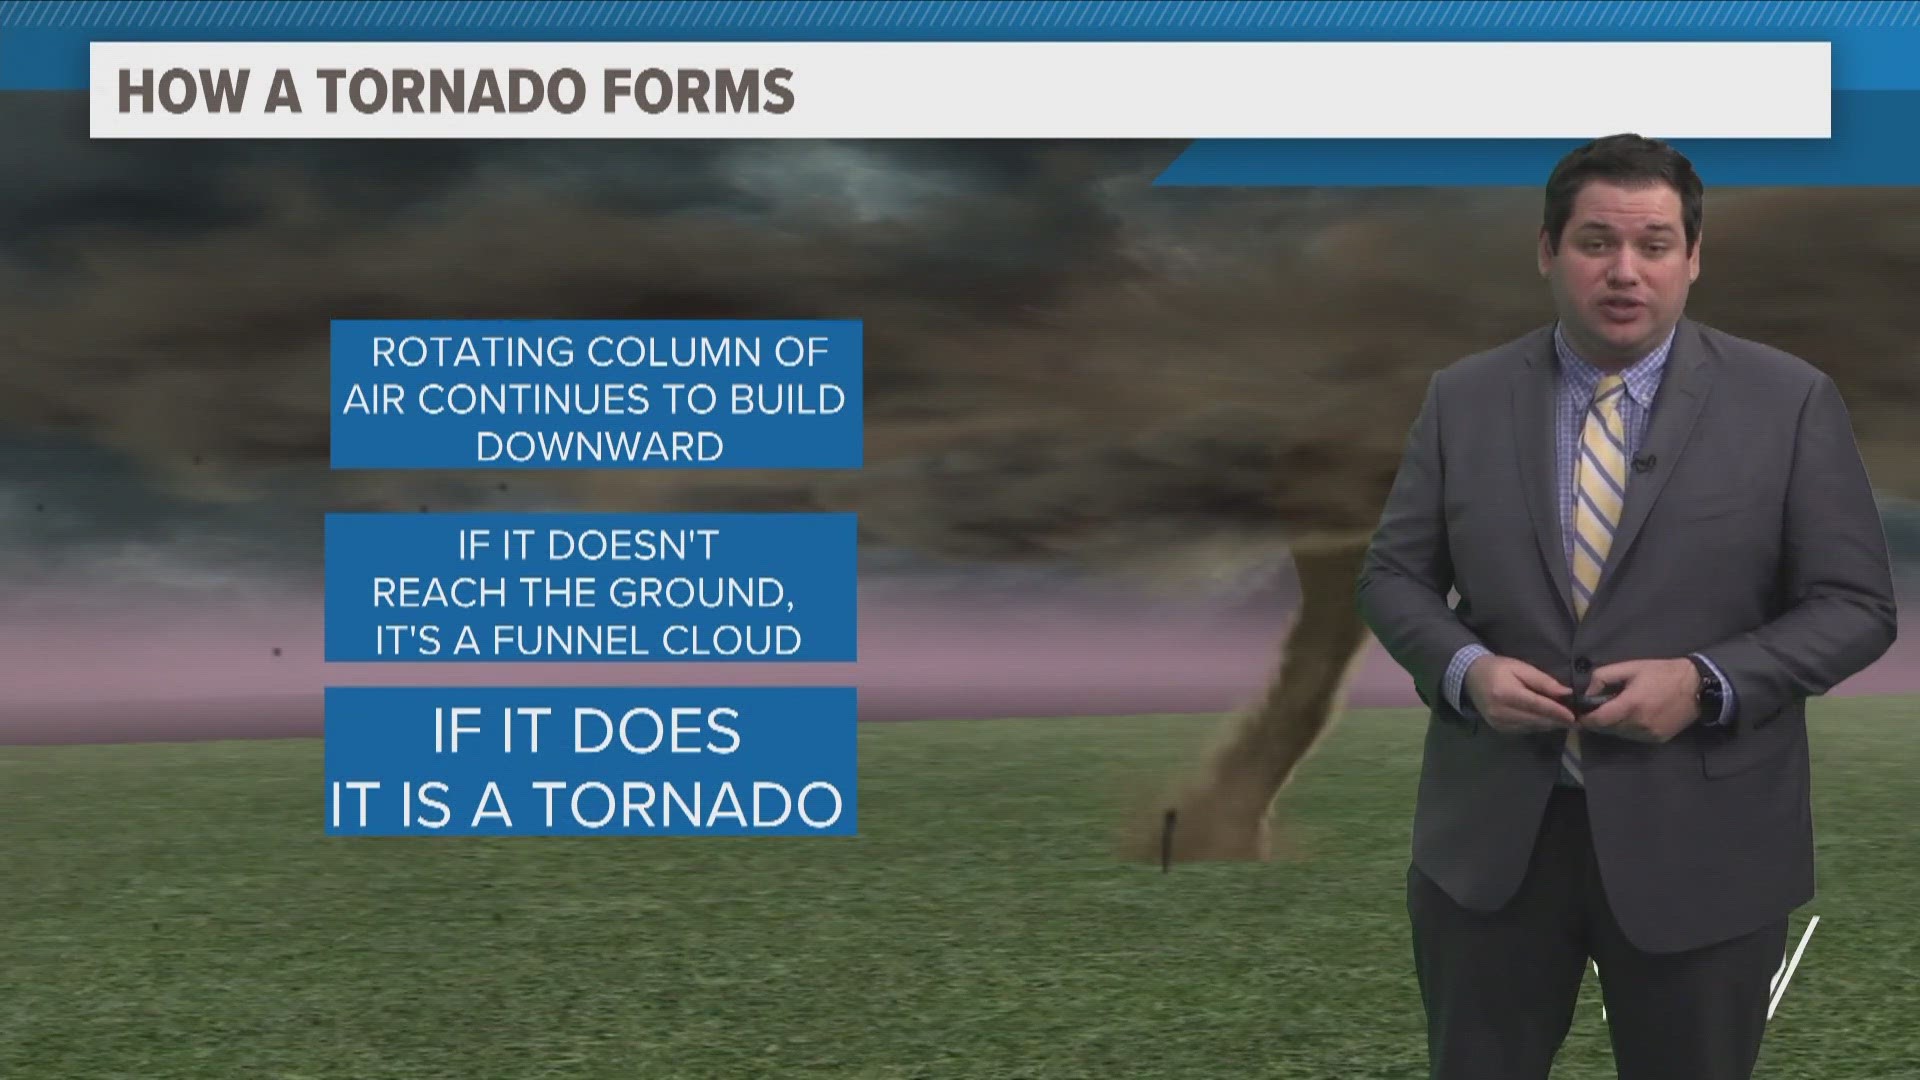 Tornadoes are common in the spring months in the Mid-South. They can be some of the most impactful severe weather we see when strong storms move in.